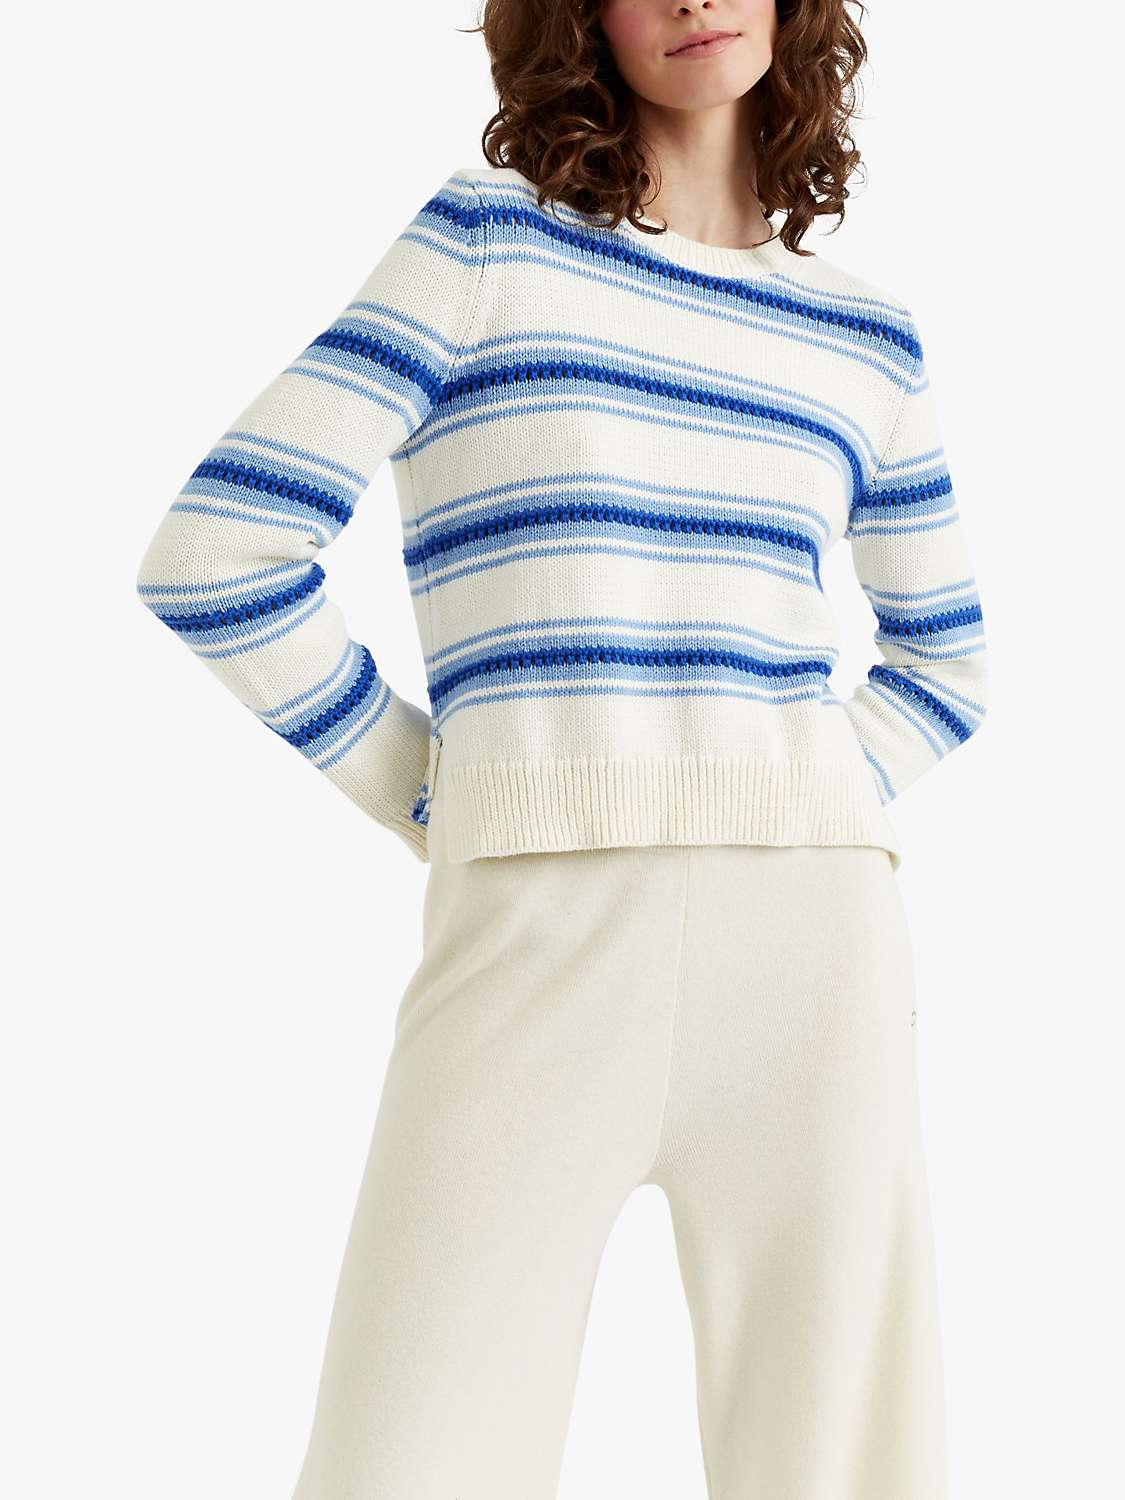 Buy Chinti & Parker Lace Stitch Jumper Online at johnlewis.com